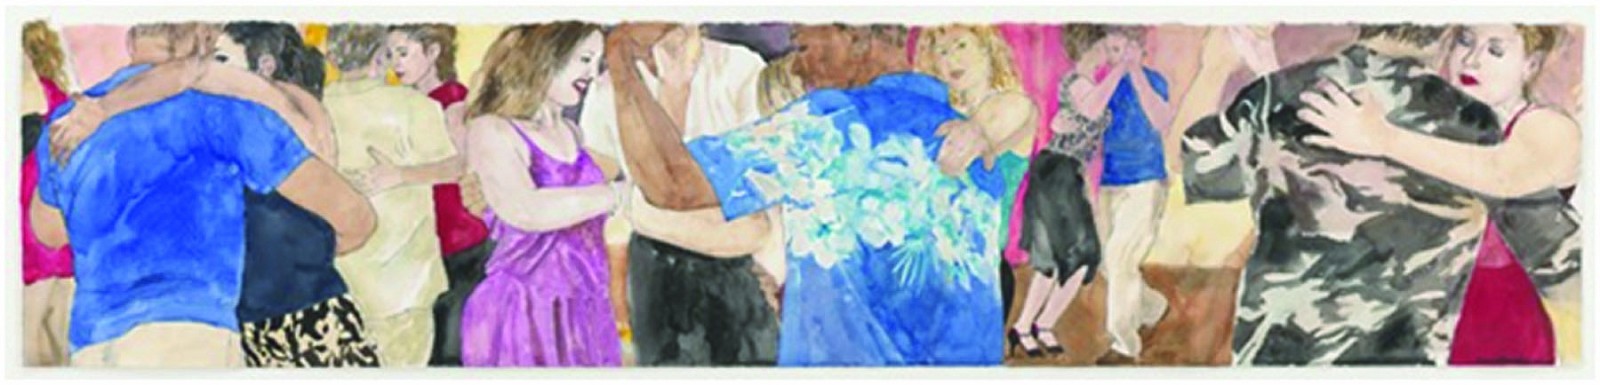 David Remfry, Untitled, 2010
Watercolor on paper, 14 x 60 in.
REMF0060